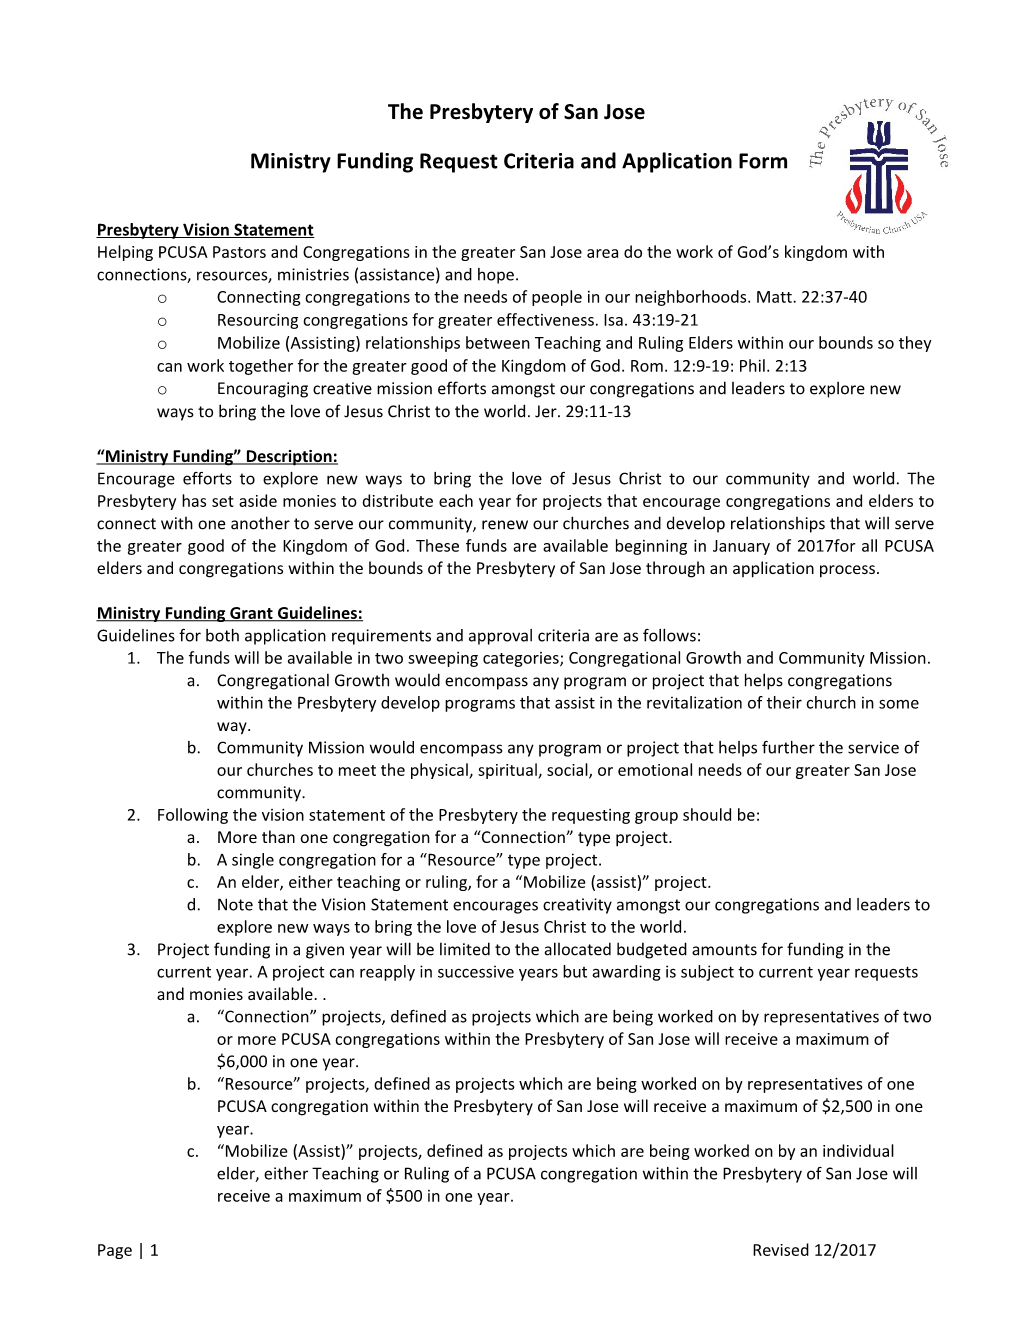 Ministry Funding Request Criteria and Application Form